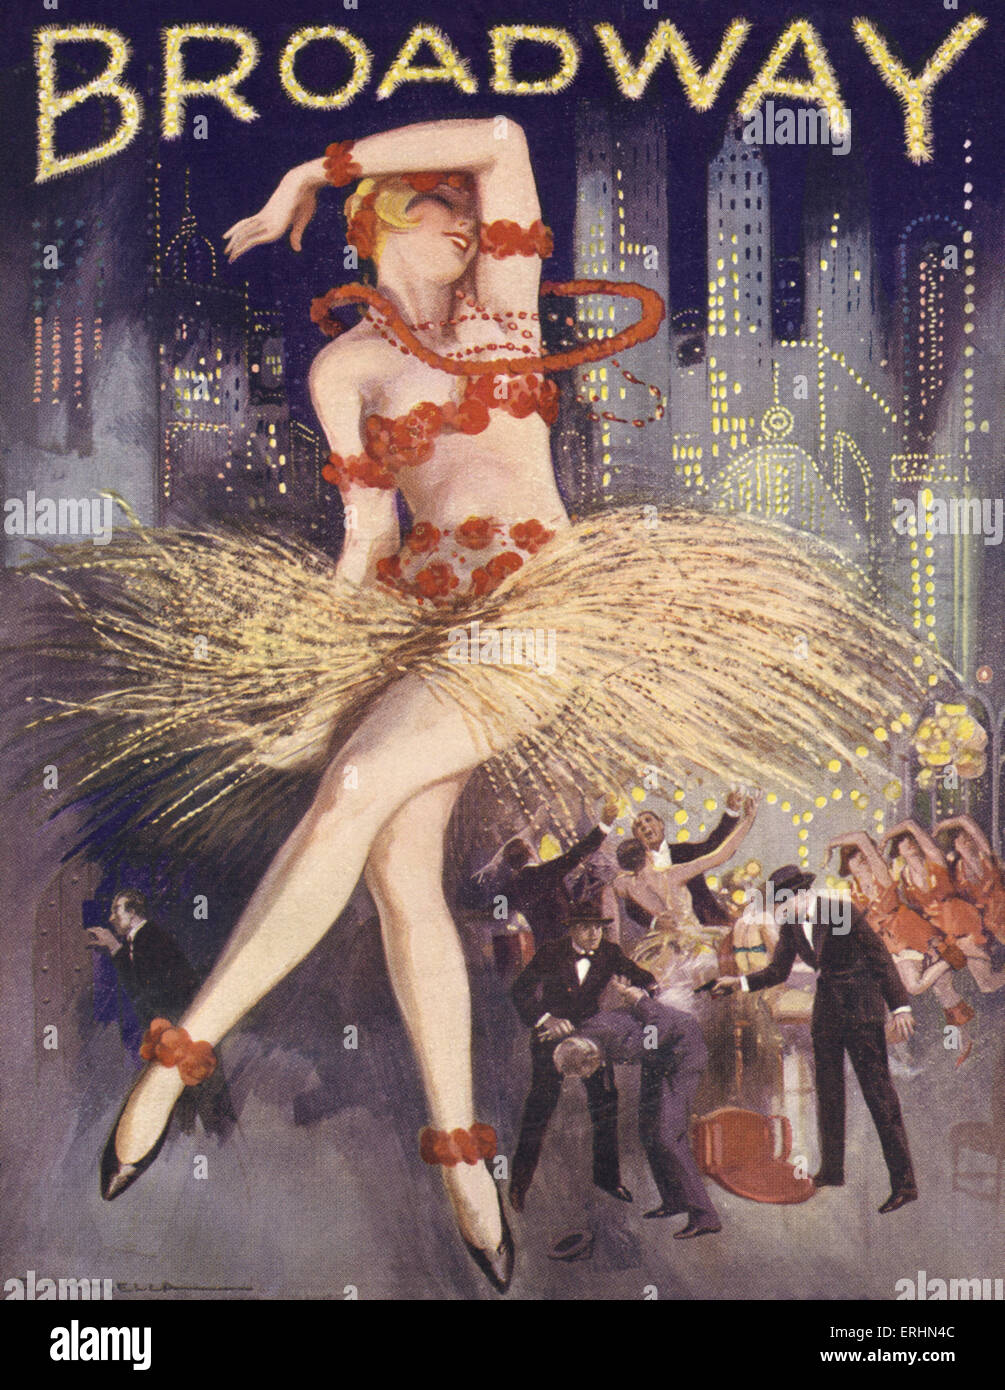 New York showgirl , and gangster background Programme cover for 'Broadway' with dancing girl in grass skirt, flower necklace and flower bracelets and anklets, and gansters shooting in the background, and skyscrapers against the night sky. Paradise Club. Cover by E P Kinsella. Stock Photo